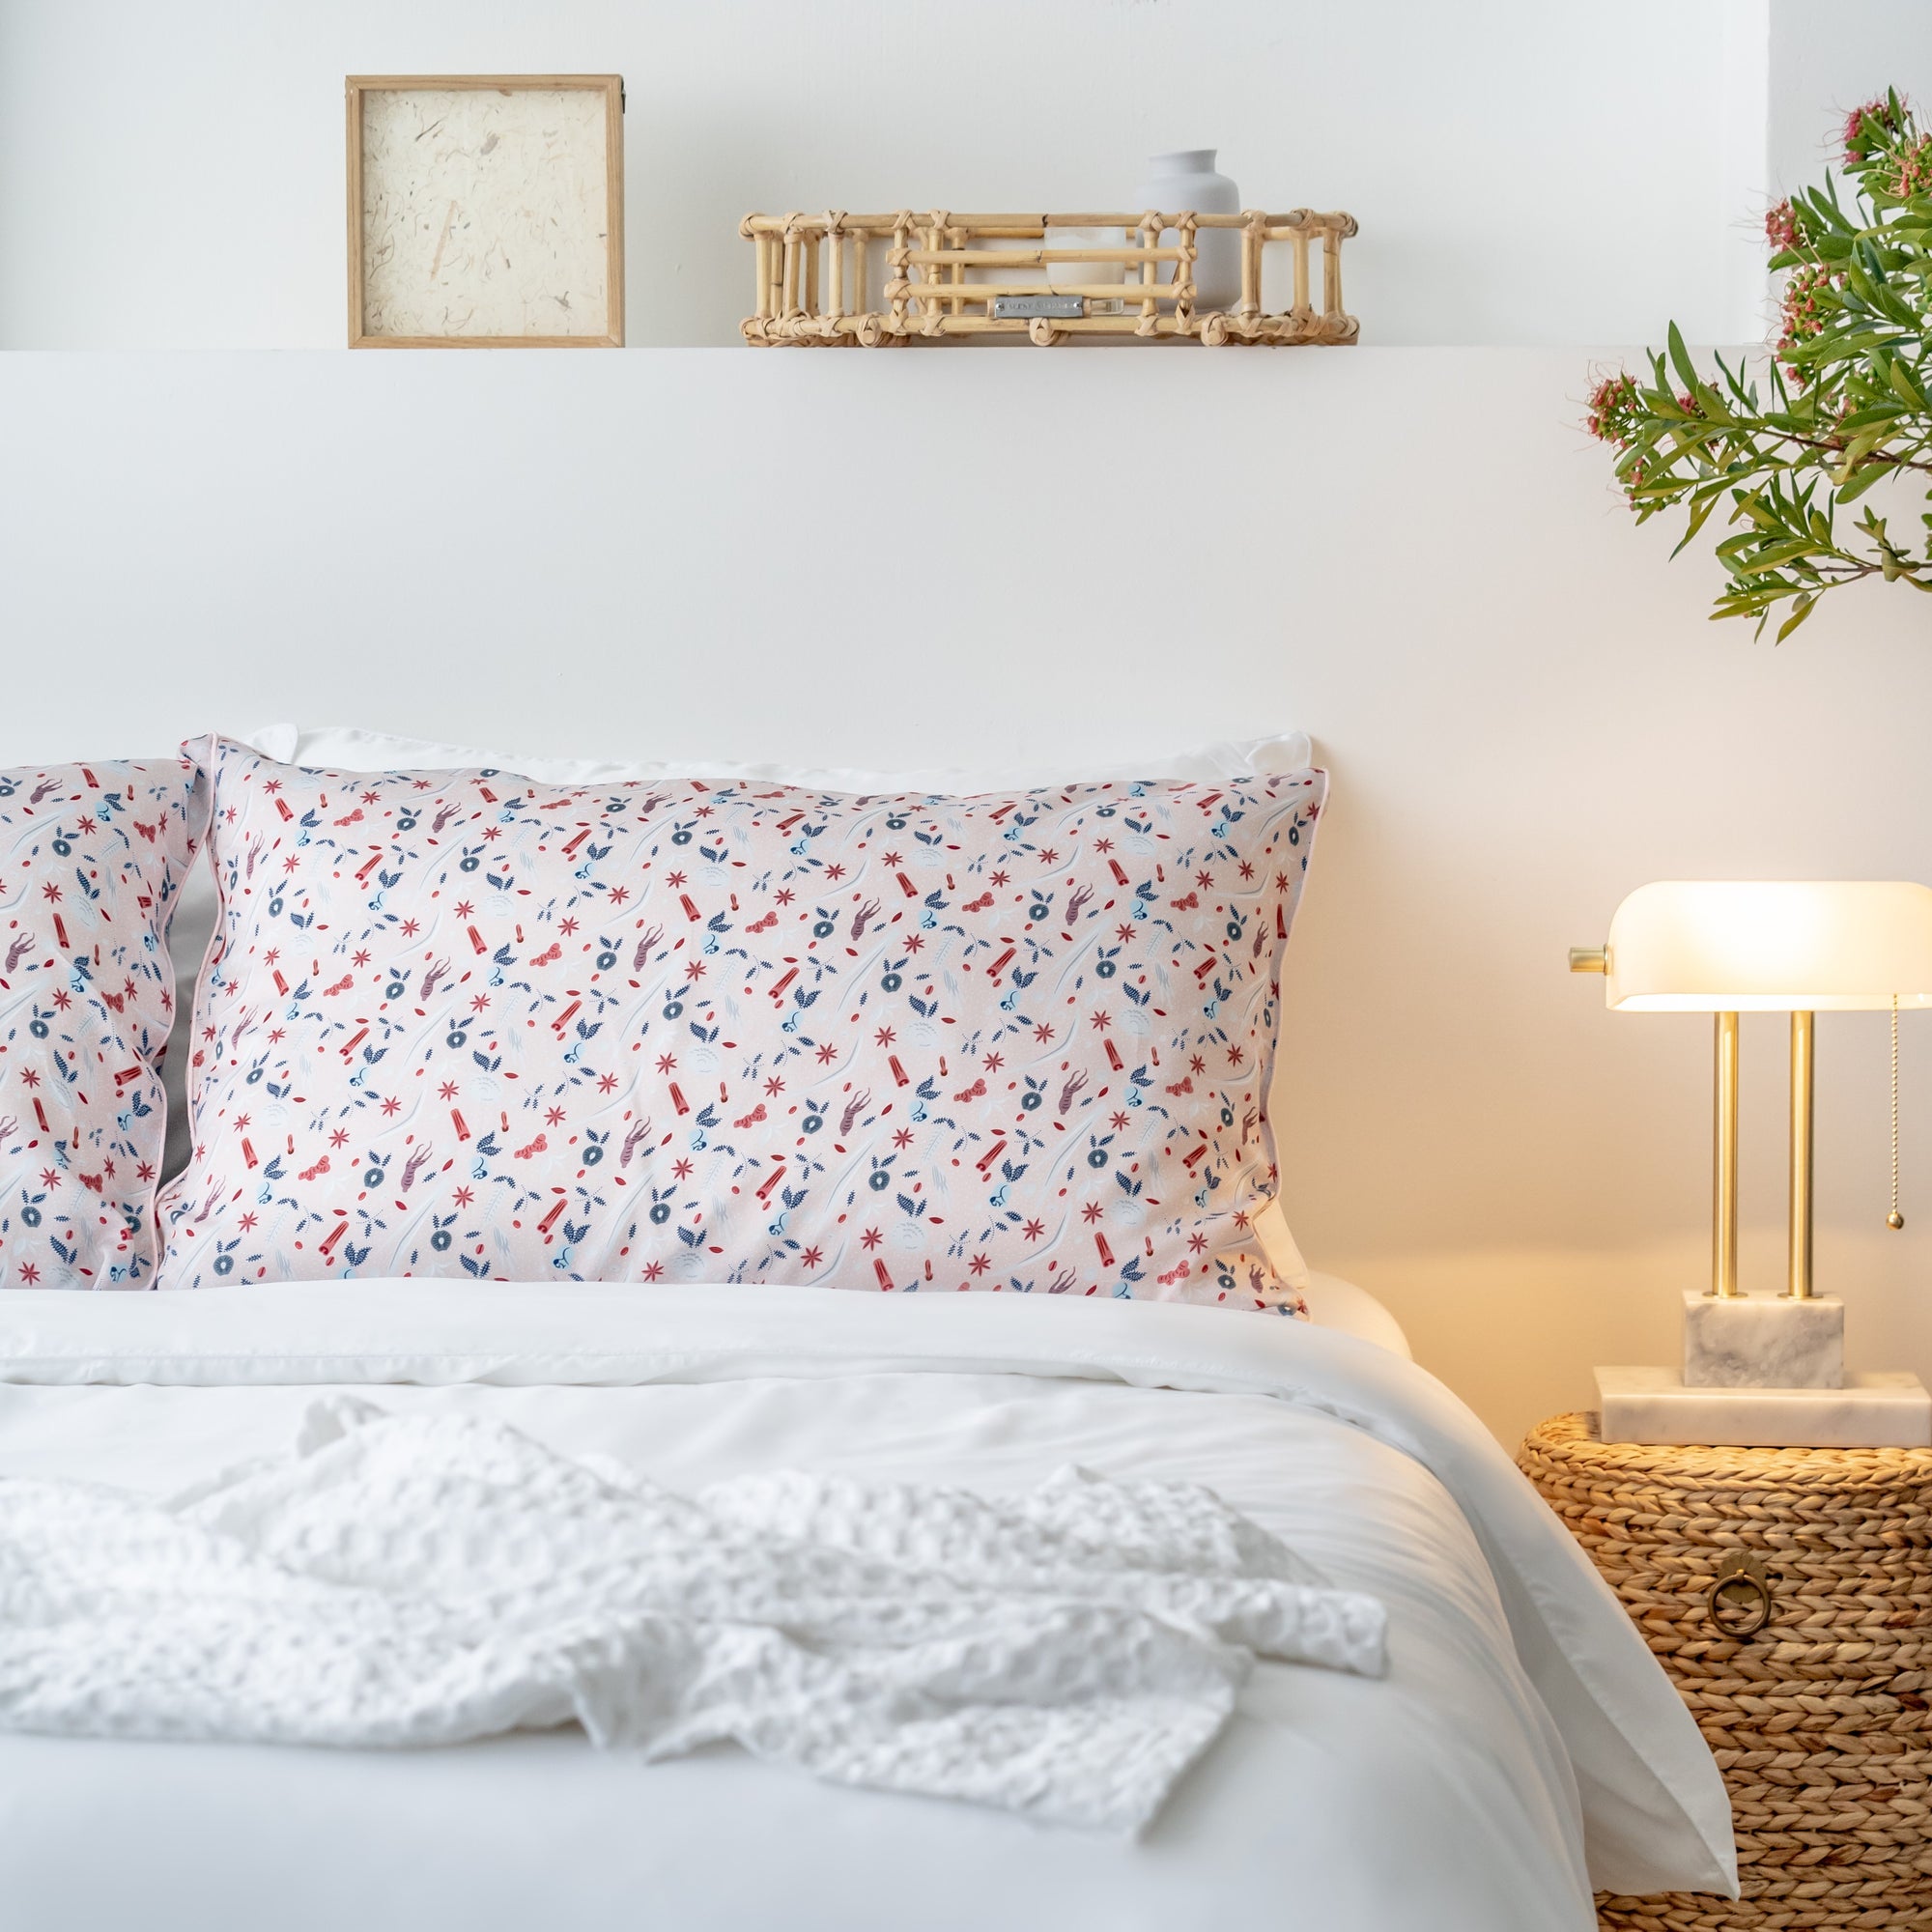 Weavve Home x SCENE SHANG Tencel Bed sheets collection singapore. Featuring SCENE SHANG Love is a Warm Brew print. TENCEL pillowcase pair in pink  prints - Love is a Warm Brew print by SCENE SHANG. Shop tencel bed sheets online Singapore at Weavve Home.